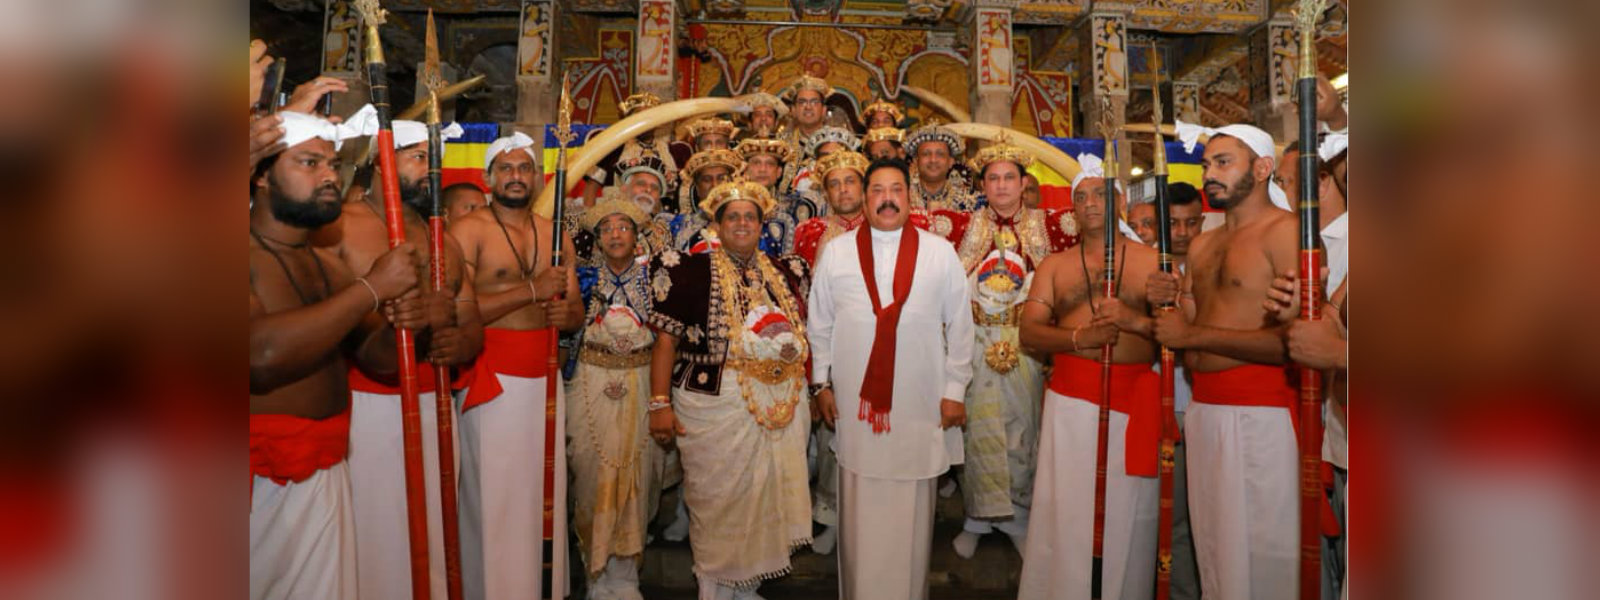 PM Rajapaksa pays homage to the Sacred Tooth Relic